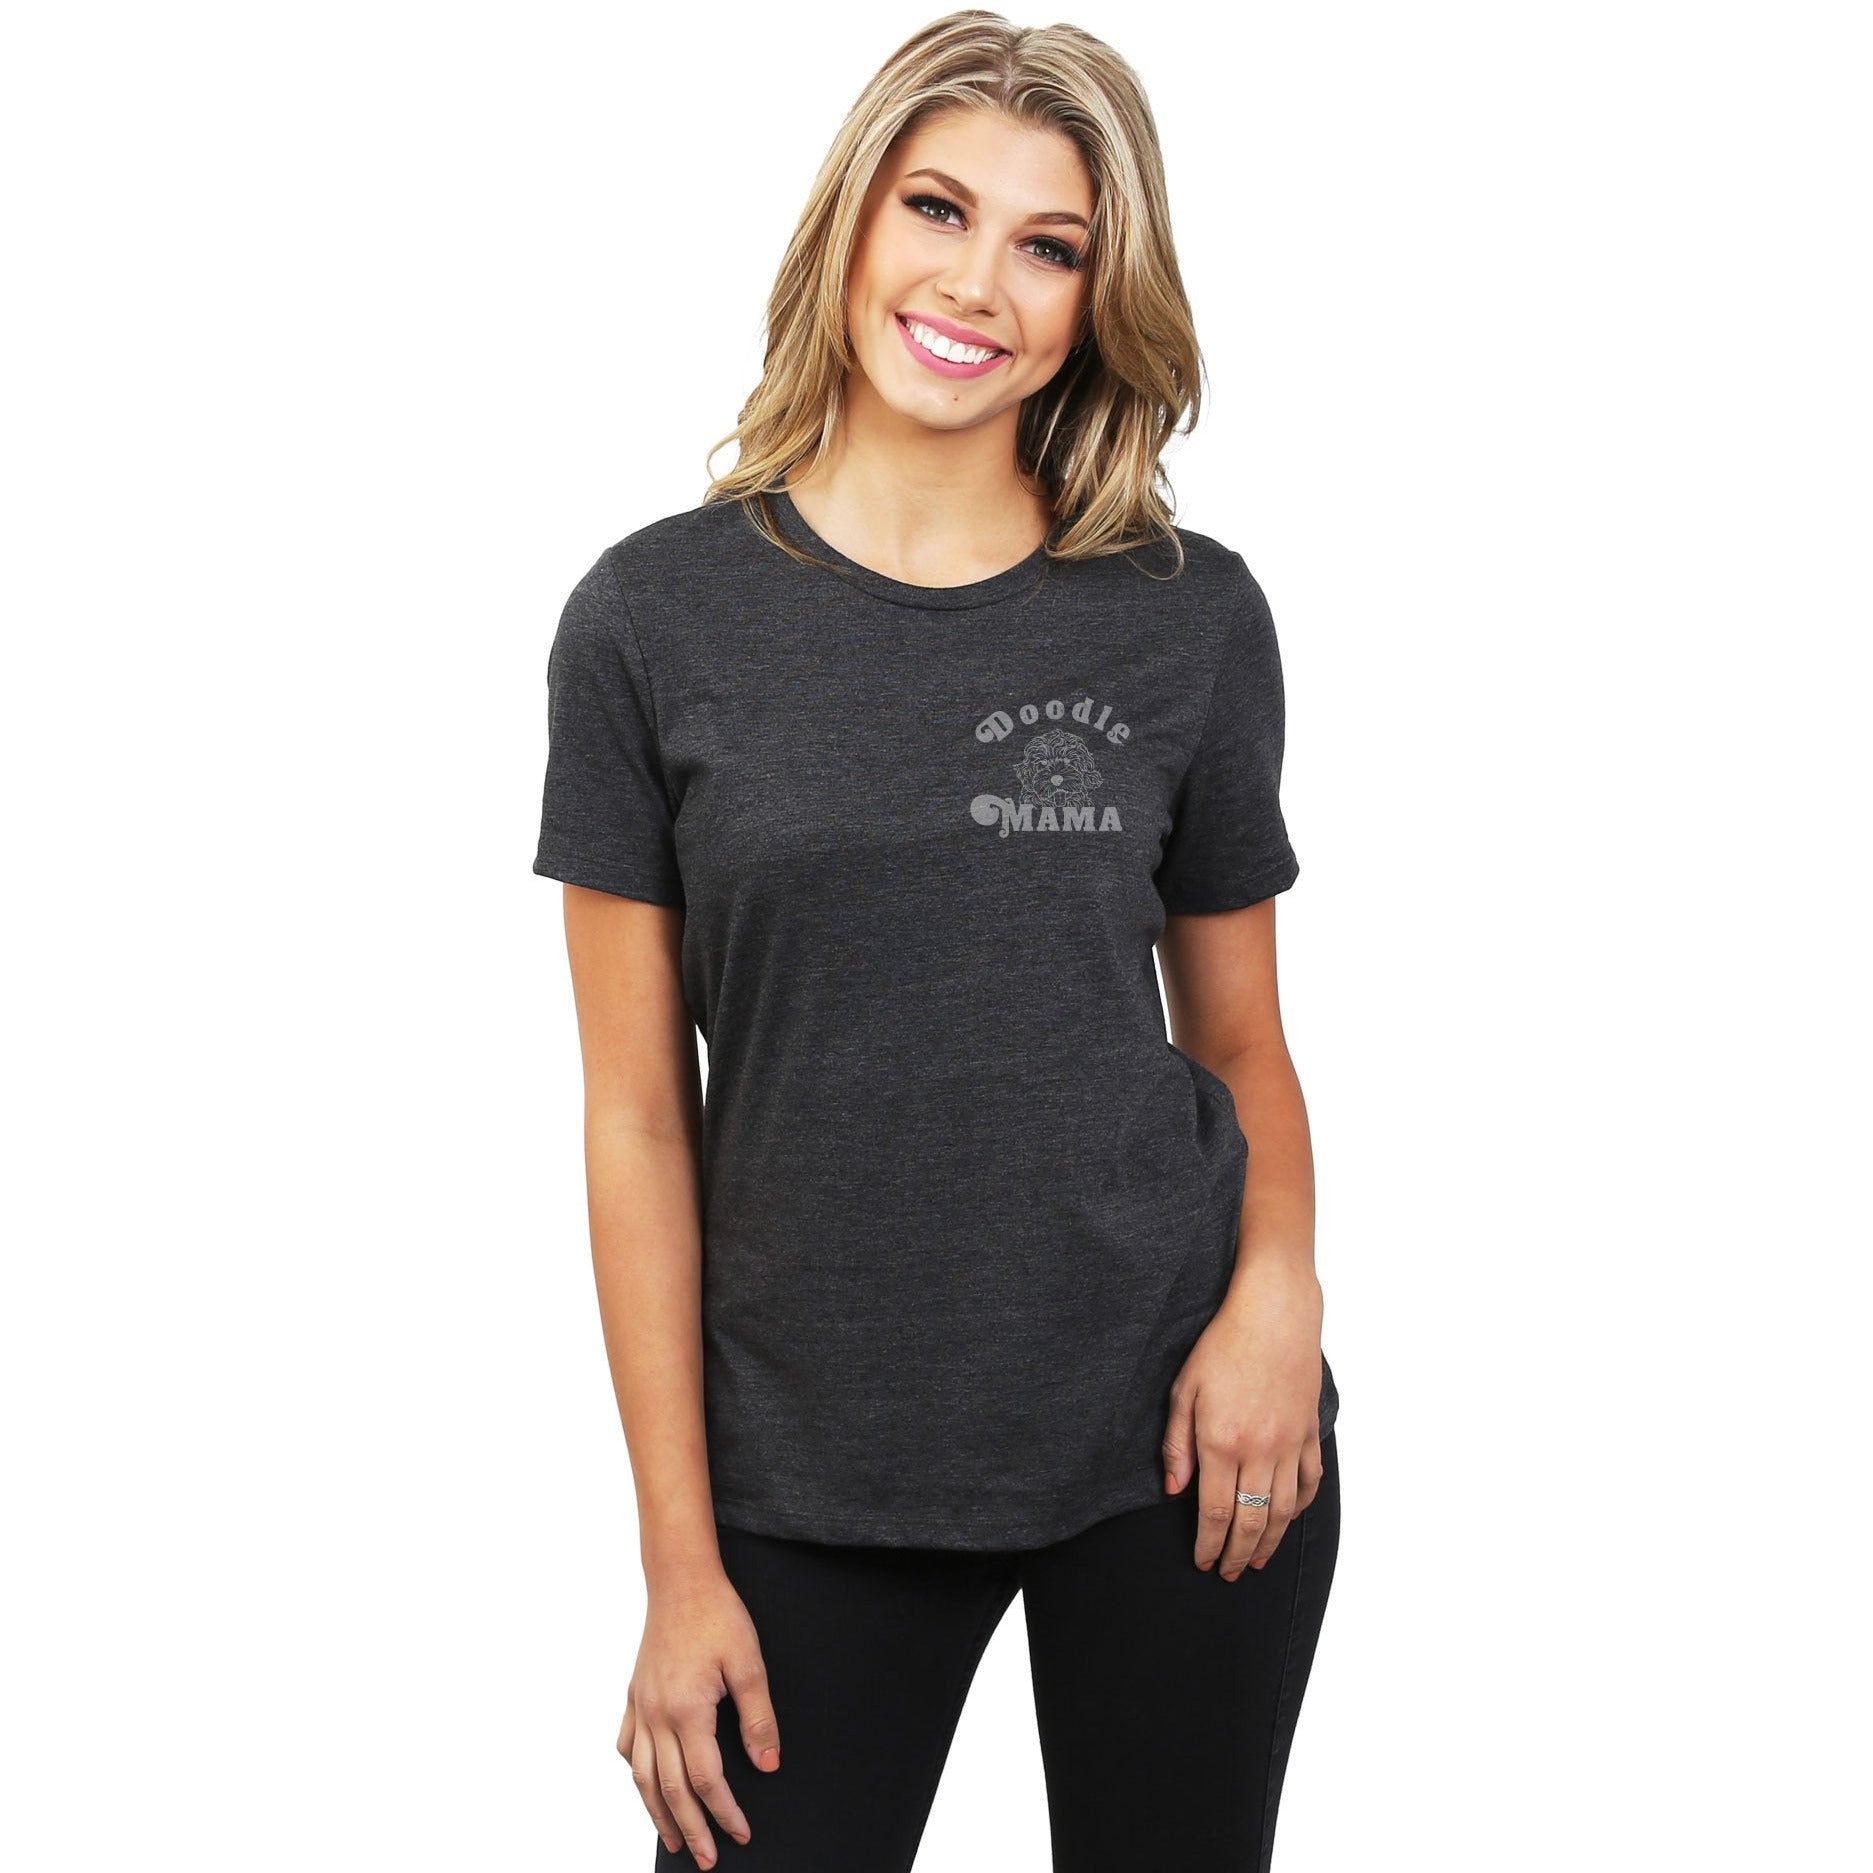 Doodle Mama Women's Relaxed Crewneck T-Shirt Top Tee Charcoal Model
